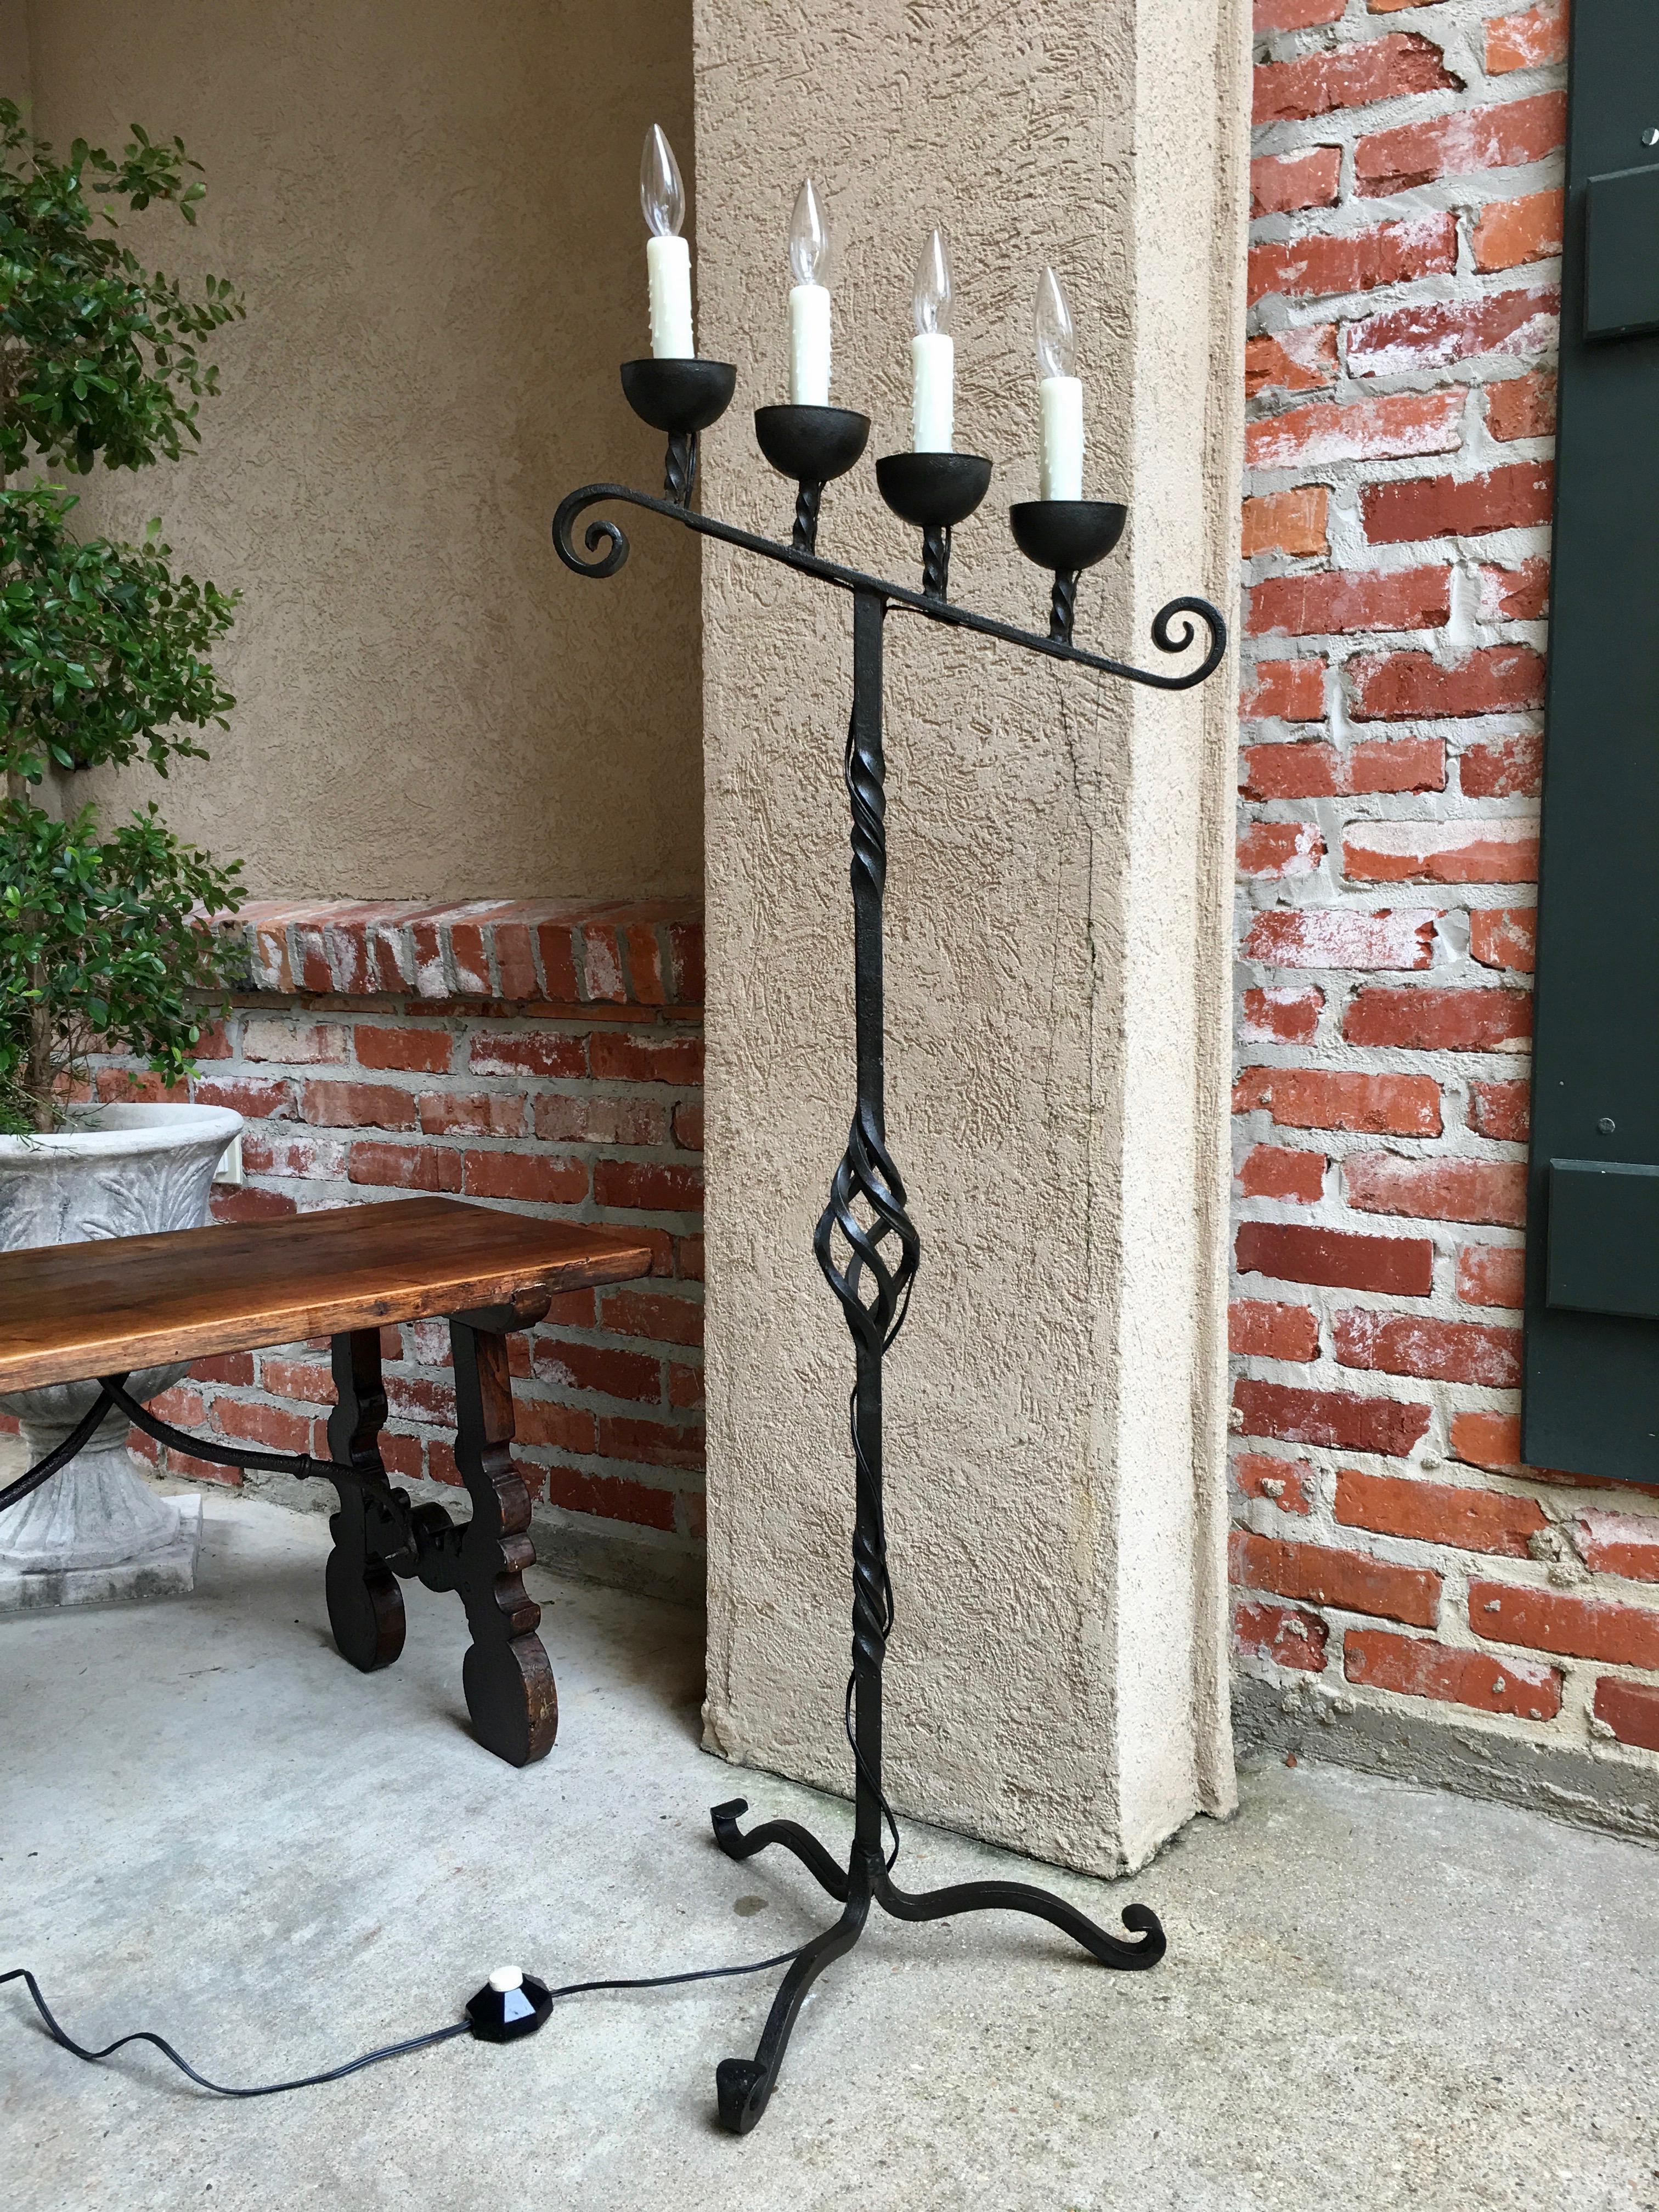 ~Direct from France~
~A gorgeous 4-light antique wrought iron floor lamp with slanted height candle holders, like an antique candelabra fresh out of a French country home or chapel!~
~Four deep metal cups each hold a faux wax candlestick over the